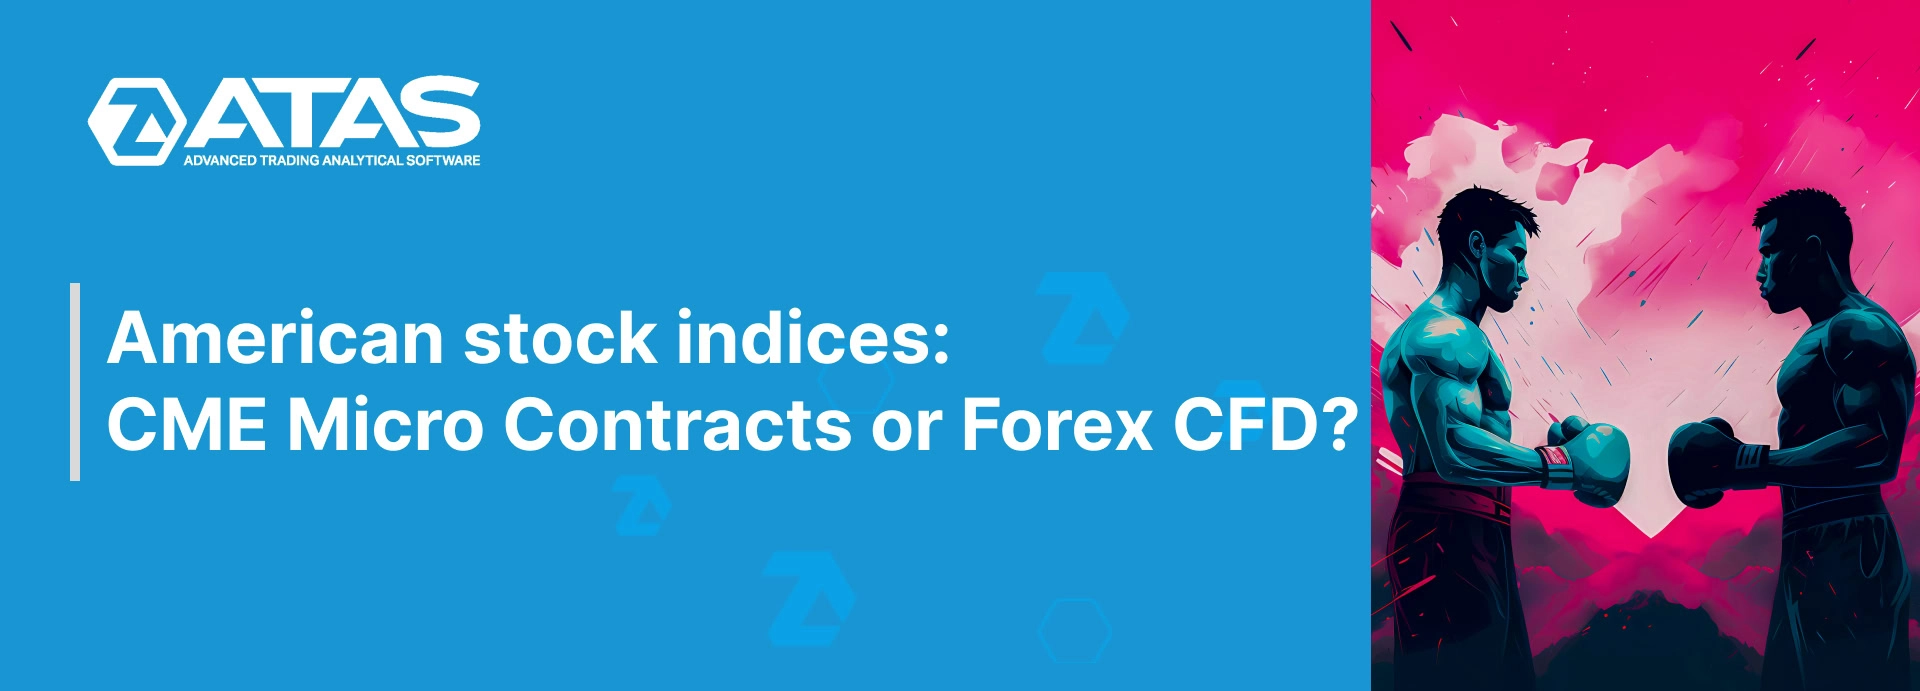 American stock indices CME Micro Contracts or Forex CFD